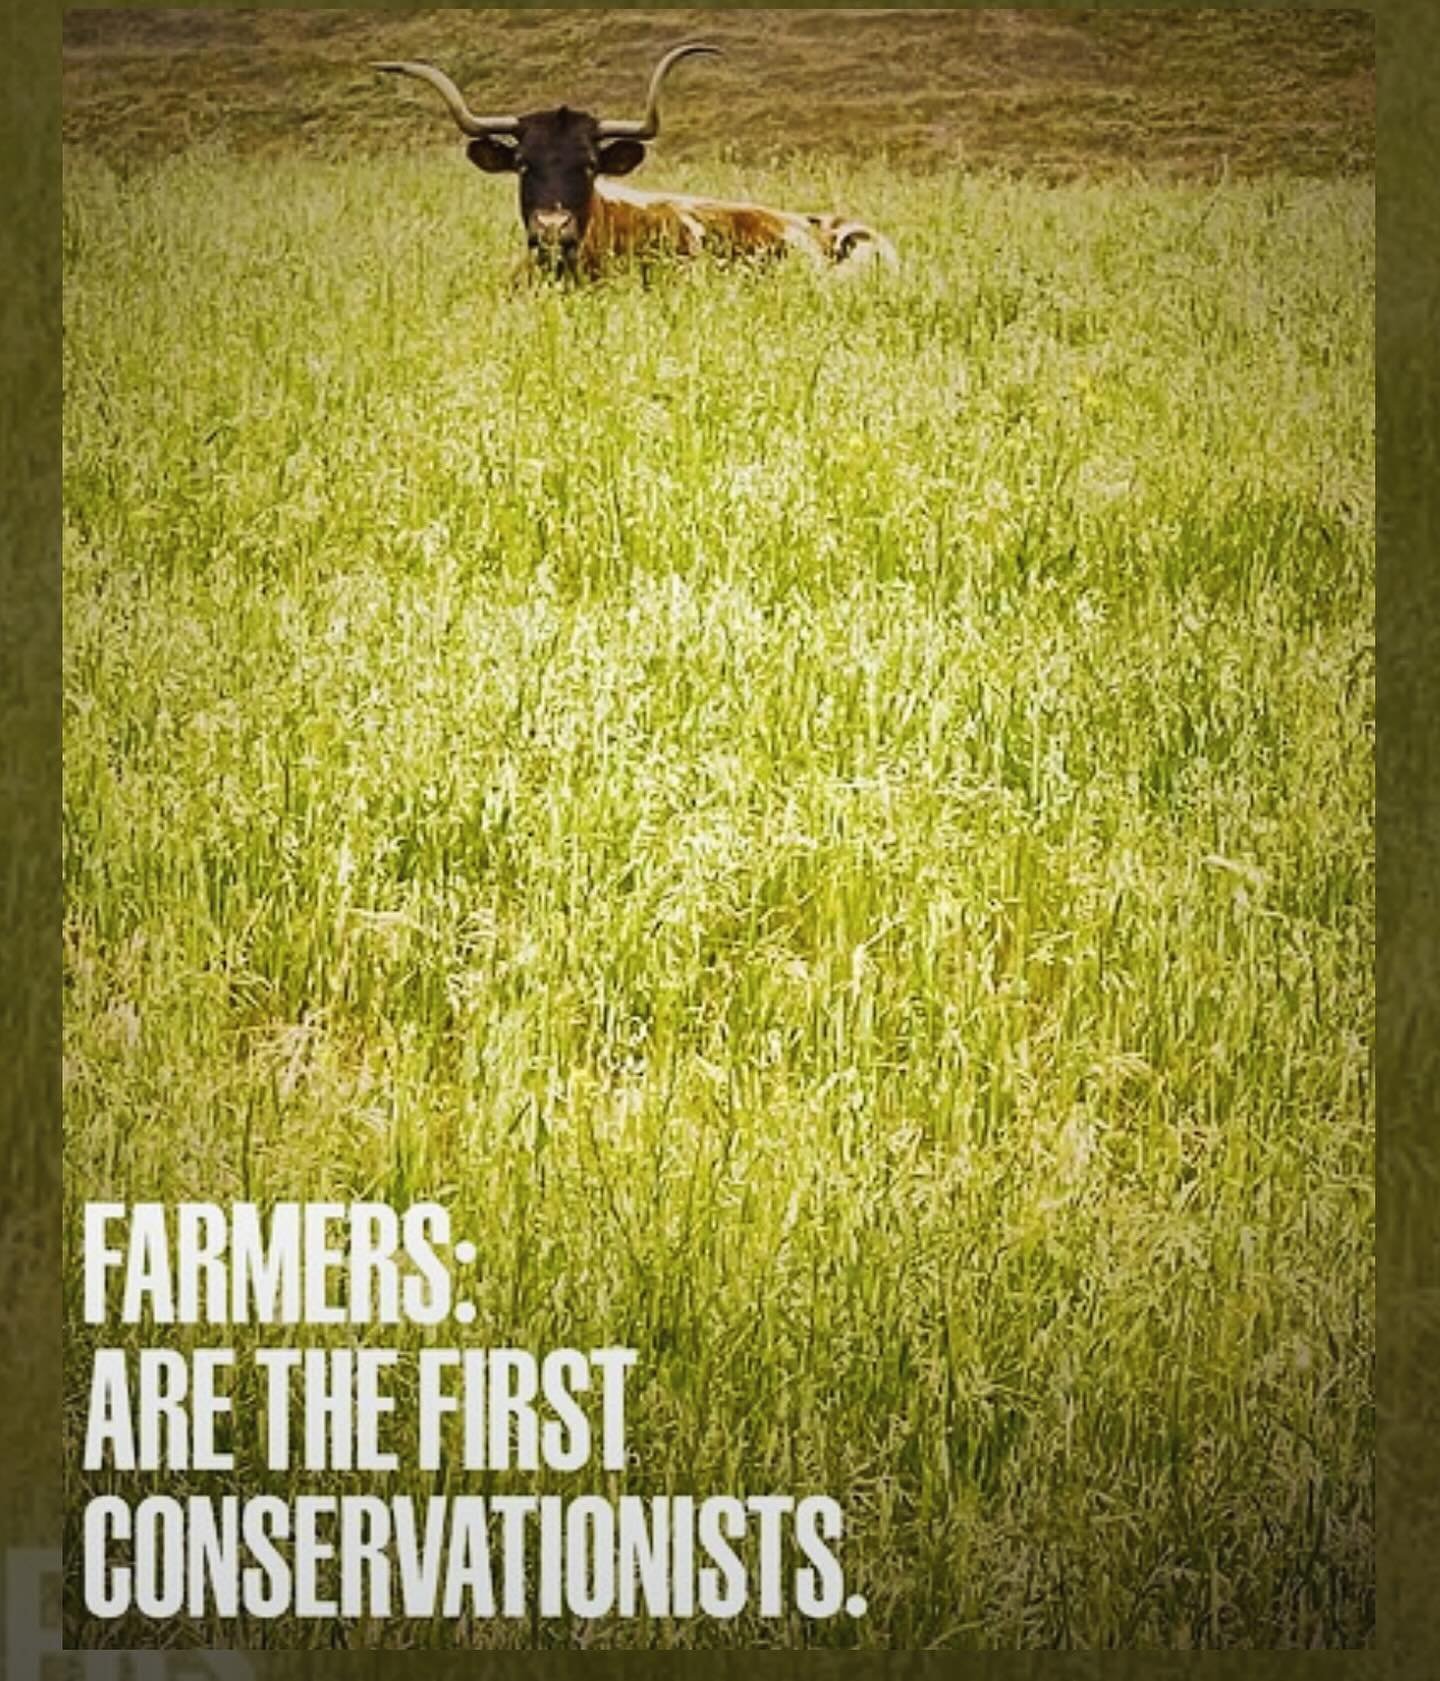 Earth Say : Farmers are the fairer Conservationists.  Us little guys are fighting the good fight. Balancing our ecosystems to provide for those around us. 
Raising Healthy Livestock - Growing Healthy Food. 
We are Stewards of our Land. 
We value the 